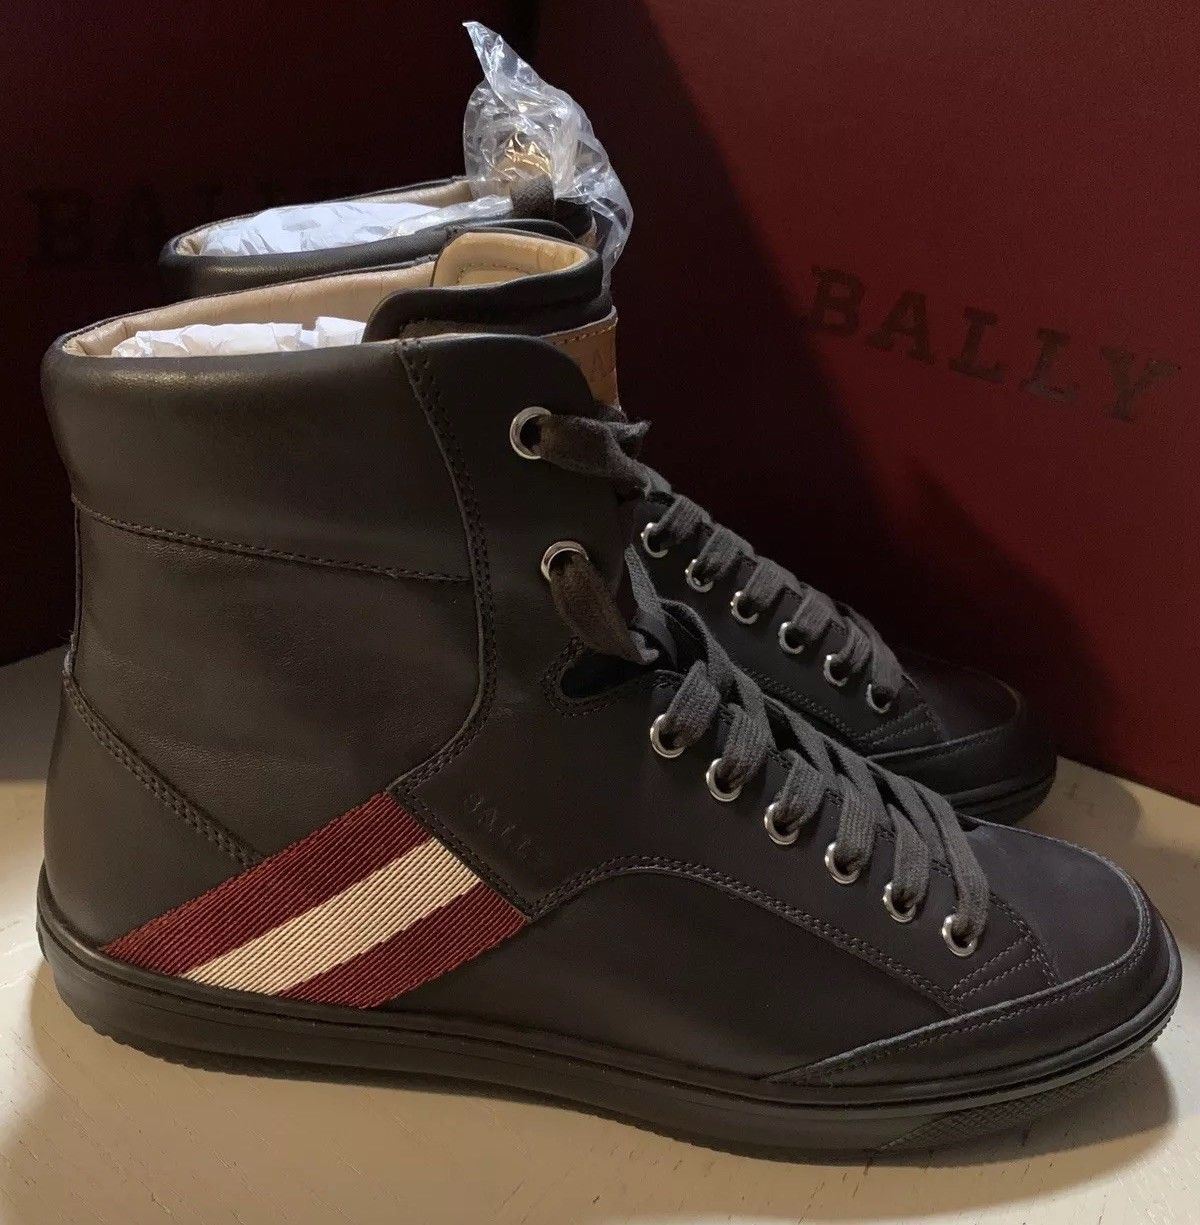 New $650 Bally Men Oldani Leather High-Top Sneakers Brown ( Chocolate ) 7 US